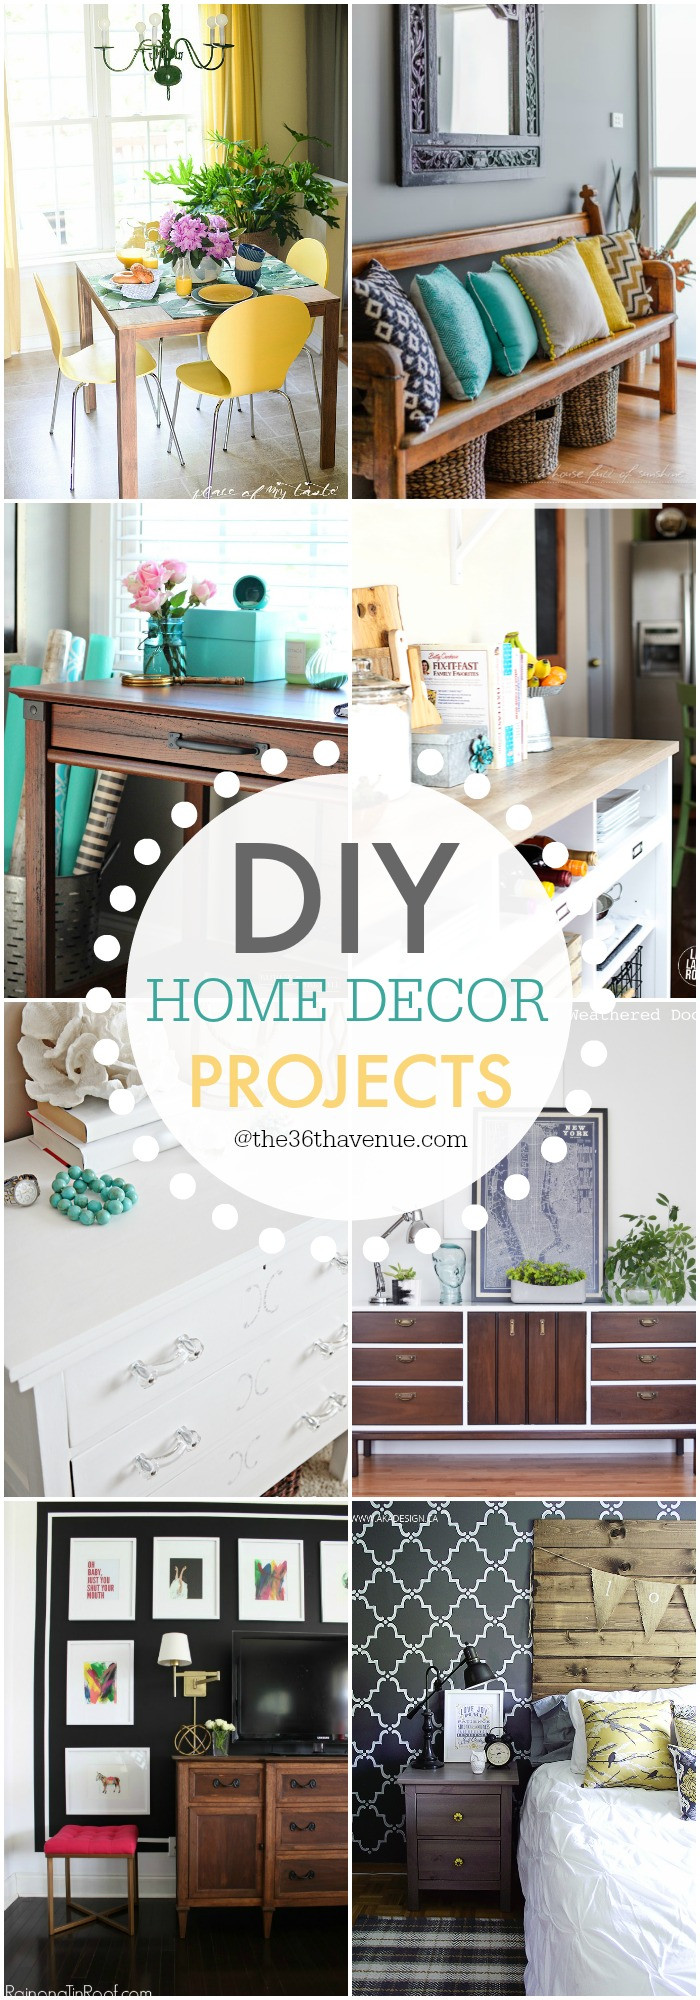 DIY Home Decor Pinterest
 The 36th AVENUE DIY Home Decor Projects and Ideas